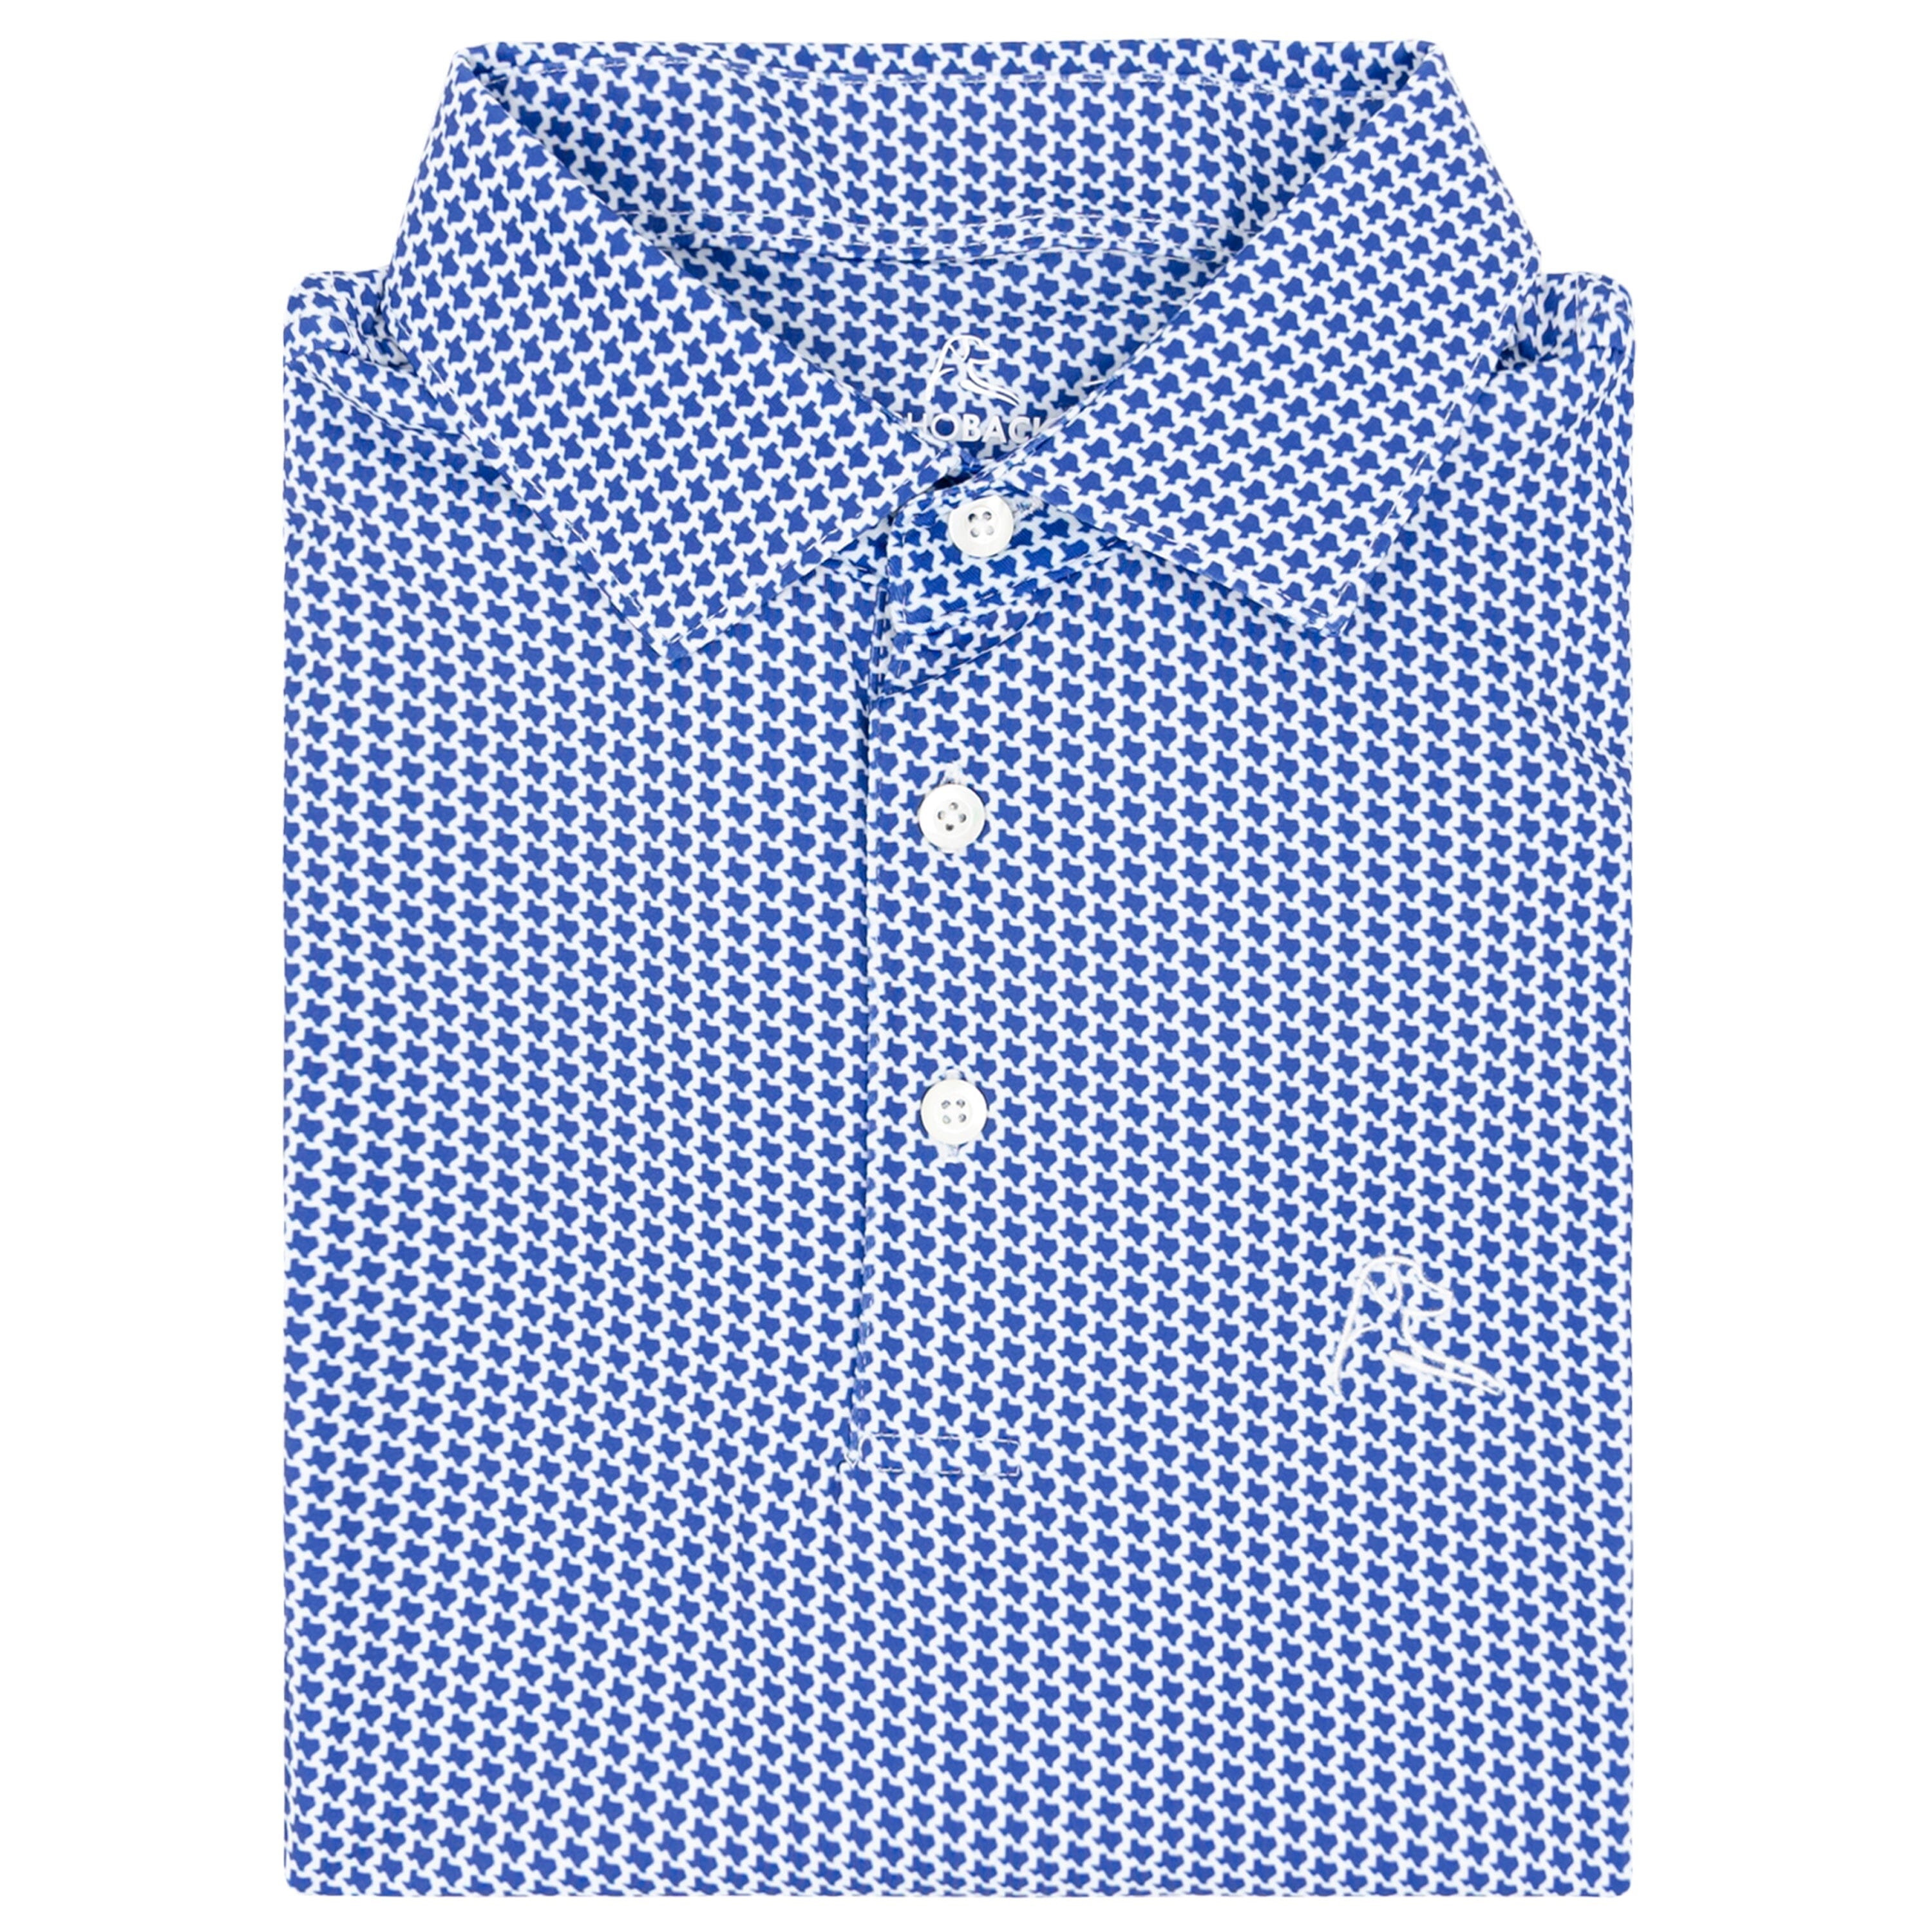 The Don’t Mess | Performance Polo | The Don’t Mess - Ocean Blue/White